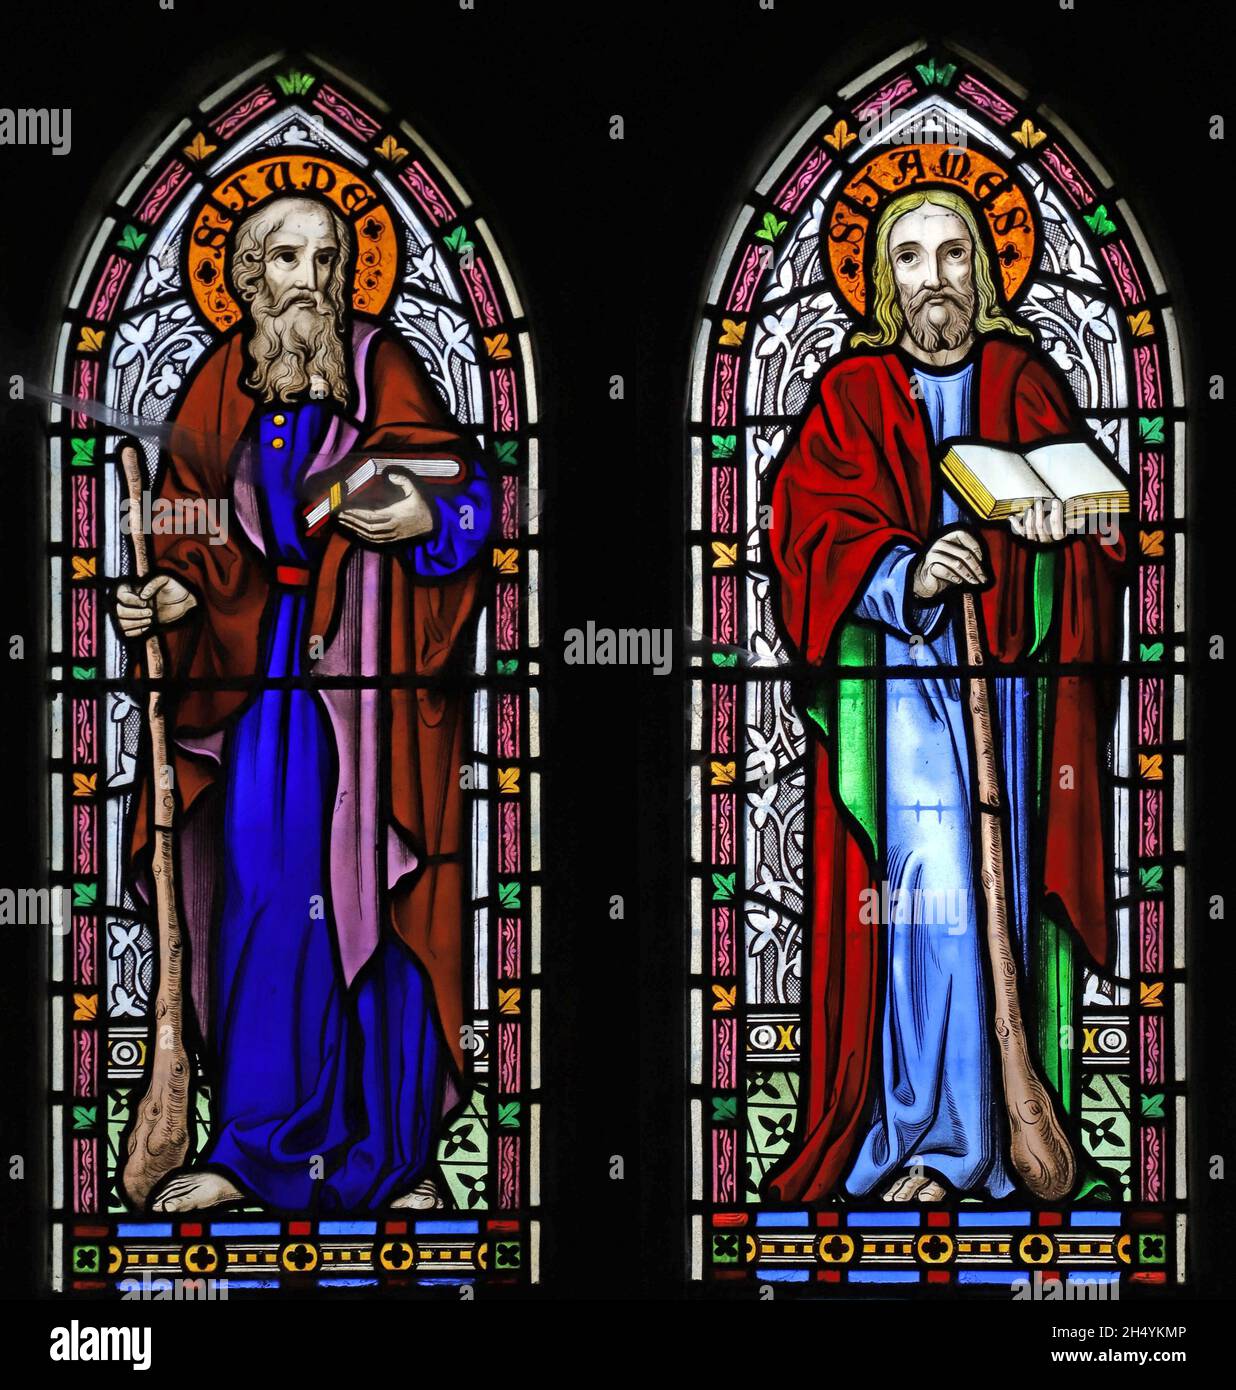 A stained glass window by Michael O'Connor depicting disiples St Jude & St James, St Michael & All Angels Church, Fringford, Oxfordshire Stock Photo